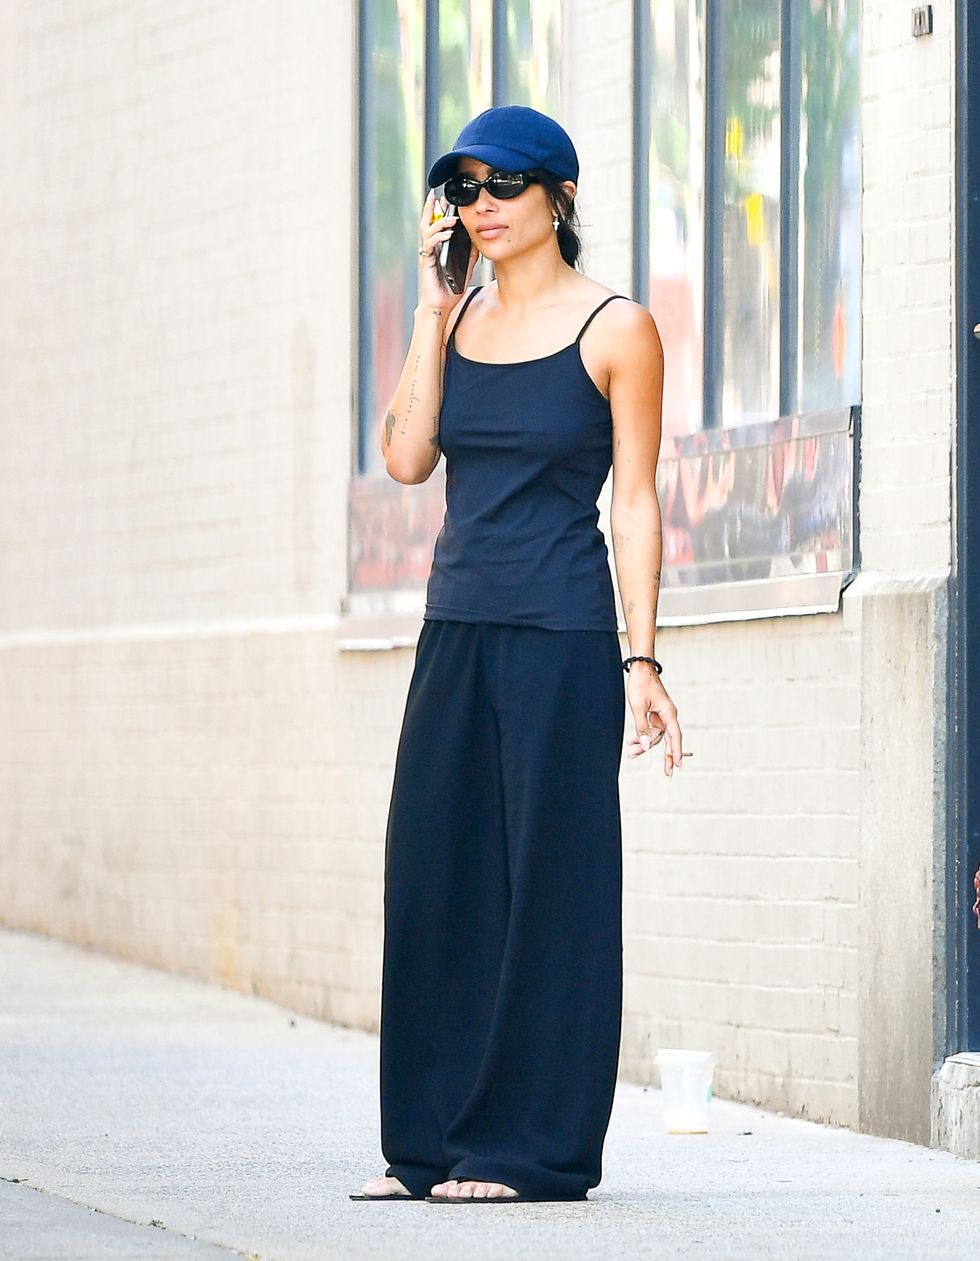 08242022 exclusive zoe kravitz is spotted taking a smoke break in new york city the 33 year old actress wore a baseball cap, dark blue tank top, black trousers, and sandals salestheimagedirectcom please bylinetheimagedirectcomexclusive please email salestheimagedirectcom for fees before use